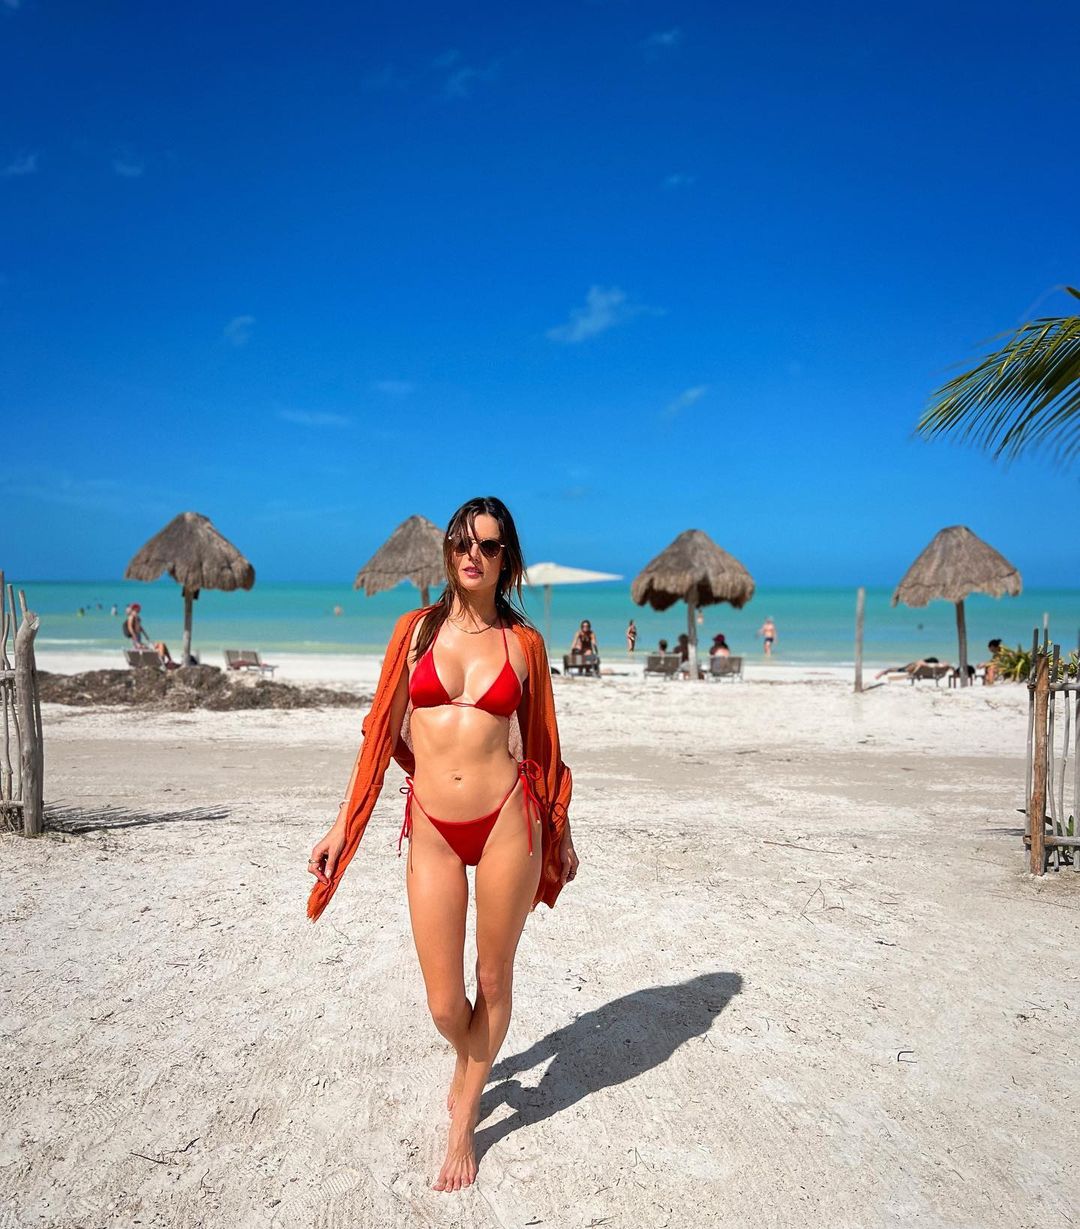 Photos n°2 : Alessandra Ambrosio’s New Year in Mexico!